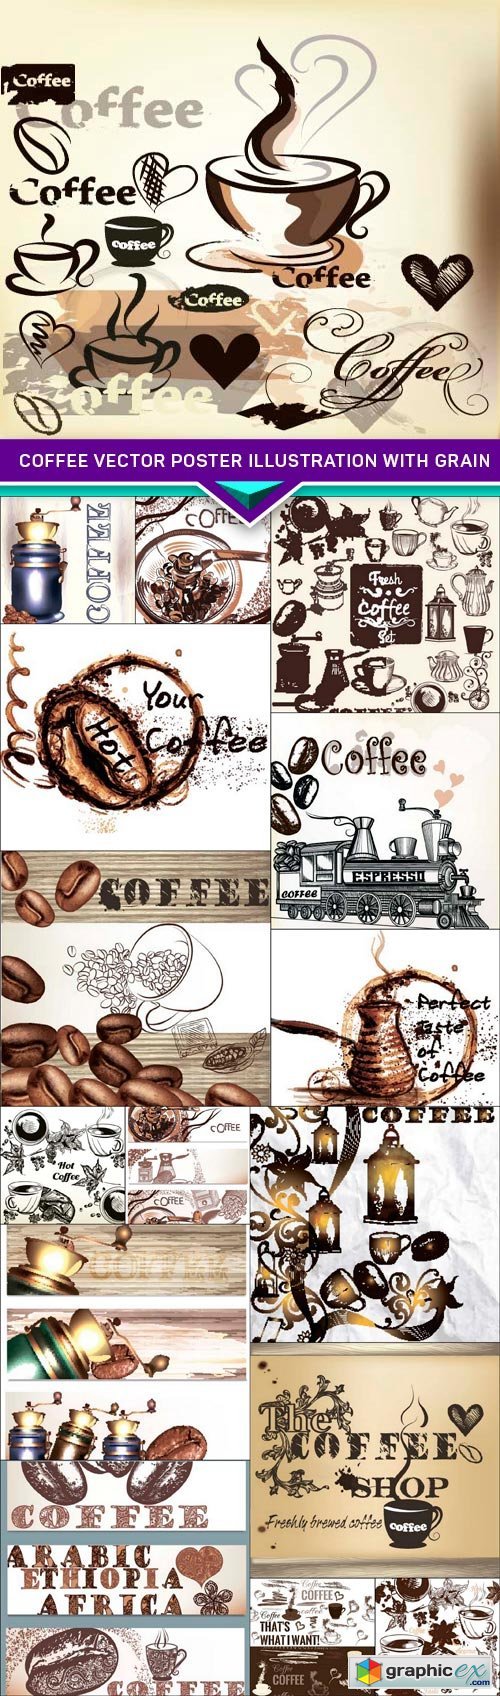 Coffee vector poster illustration with grain 16x EPS